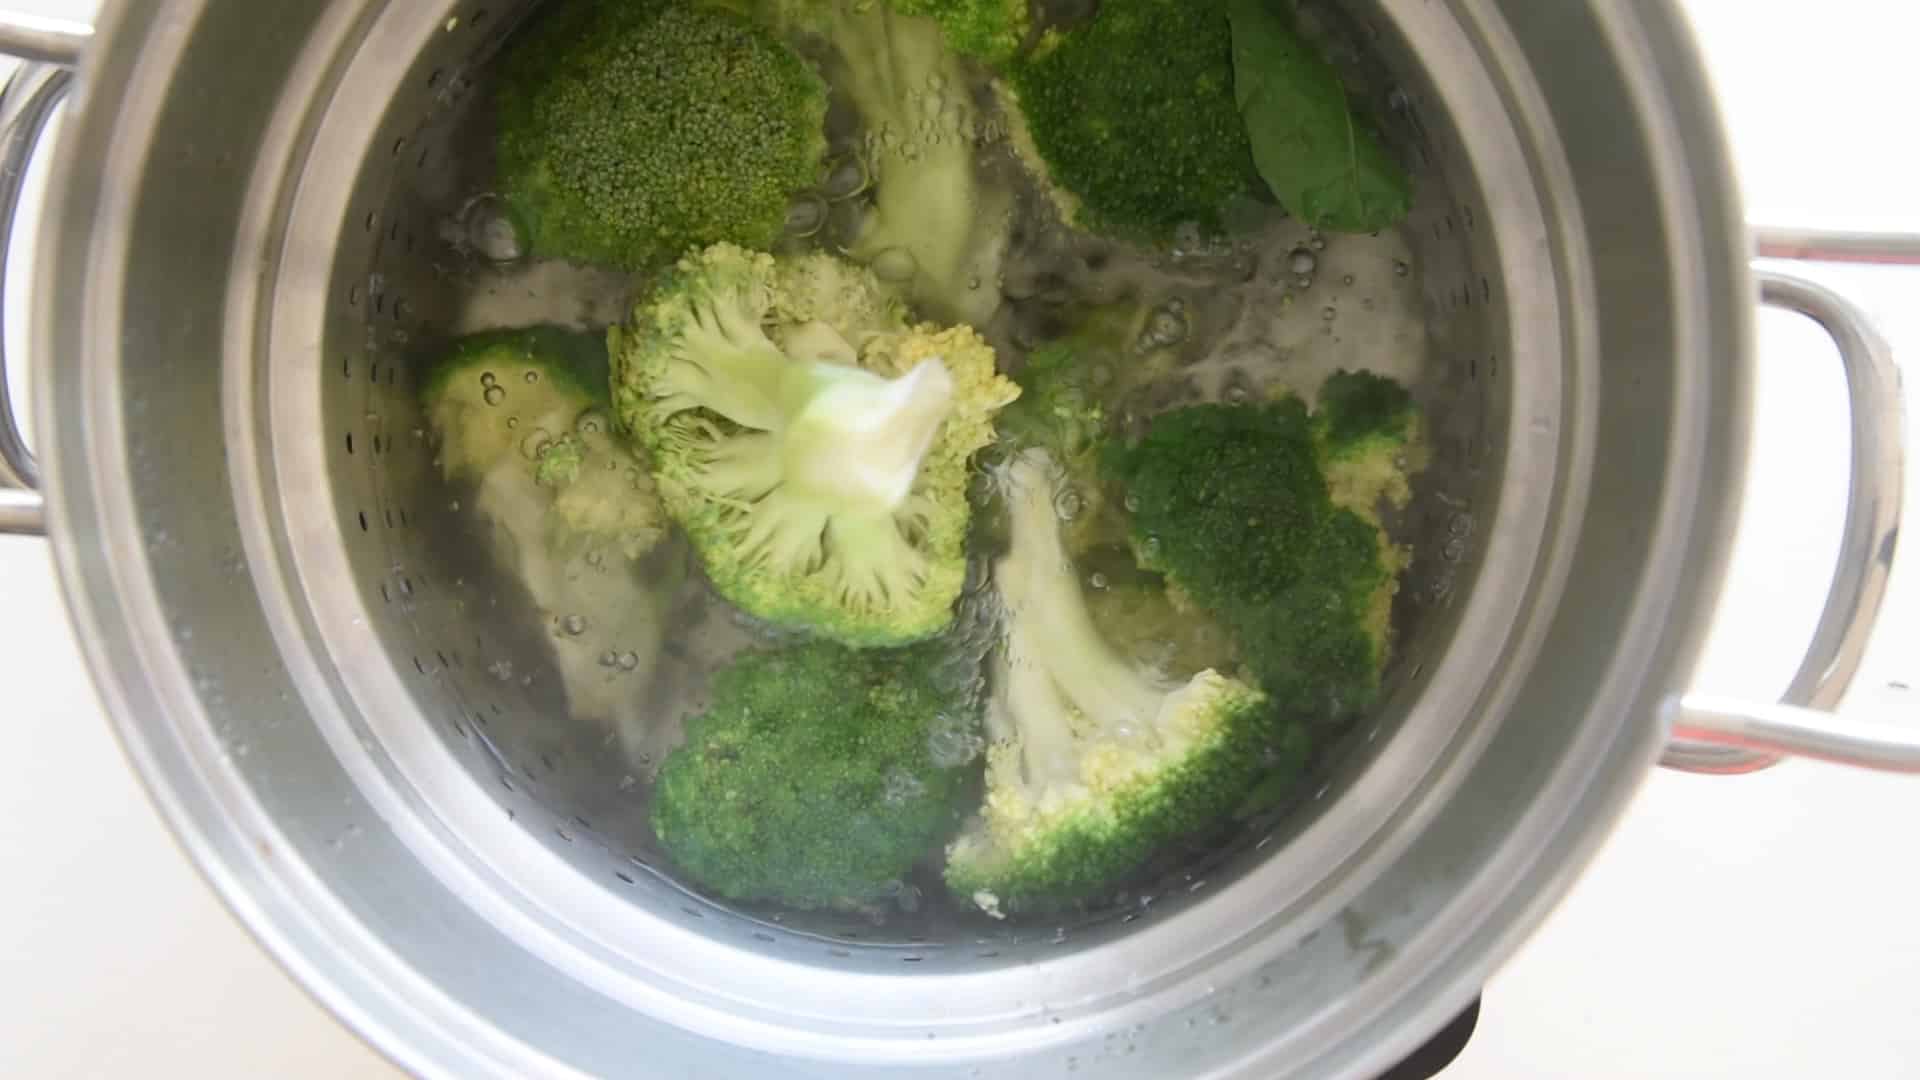 Boiling the broccoli